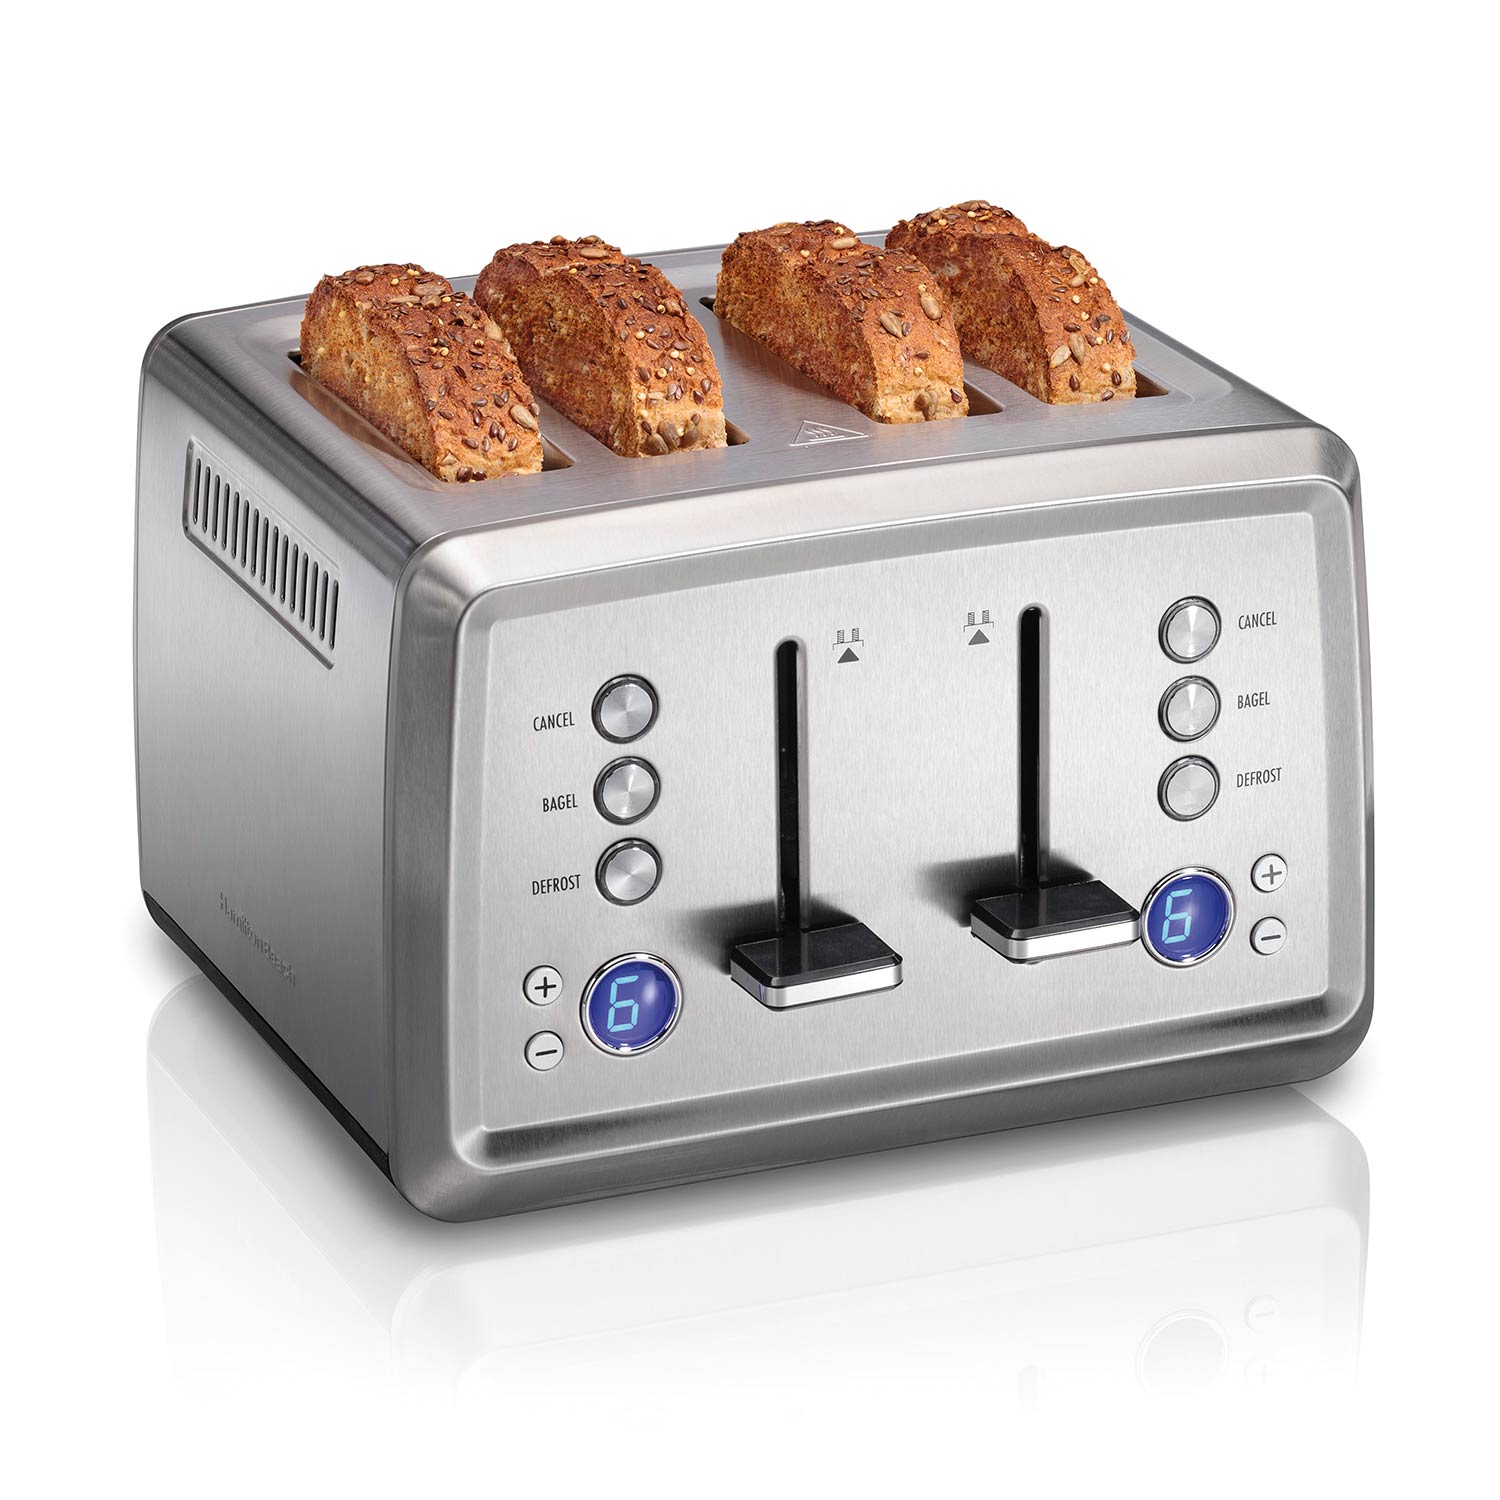 Bagel & Defrost Settings Sure-Toast Technology Hamilton Beach 22782 Toaster with Wide Slots Auto Boost to Lift Smaller Breads 2 Slice Polished Stainless Steel 